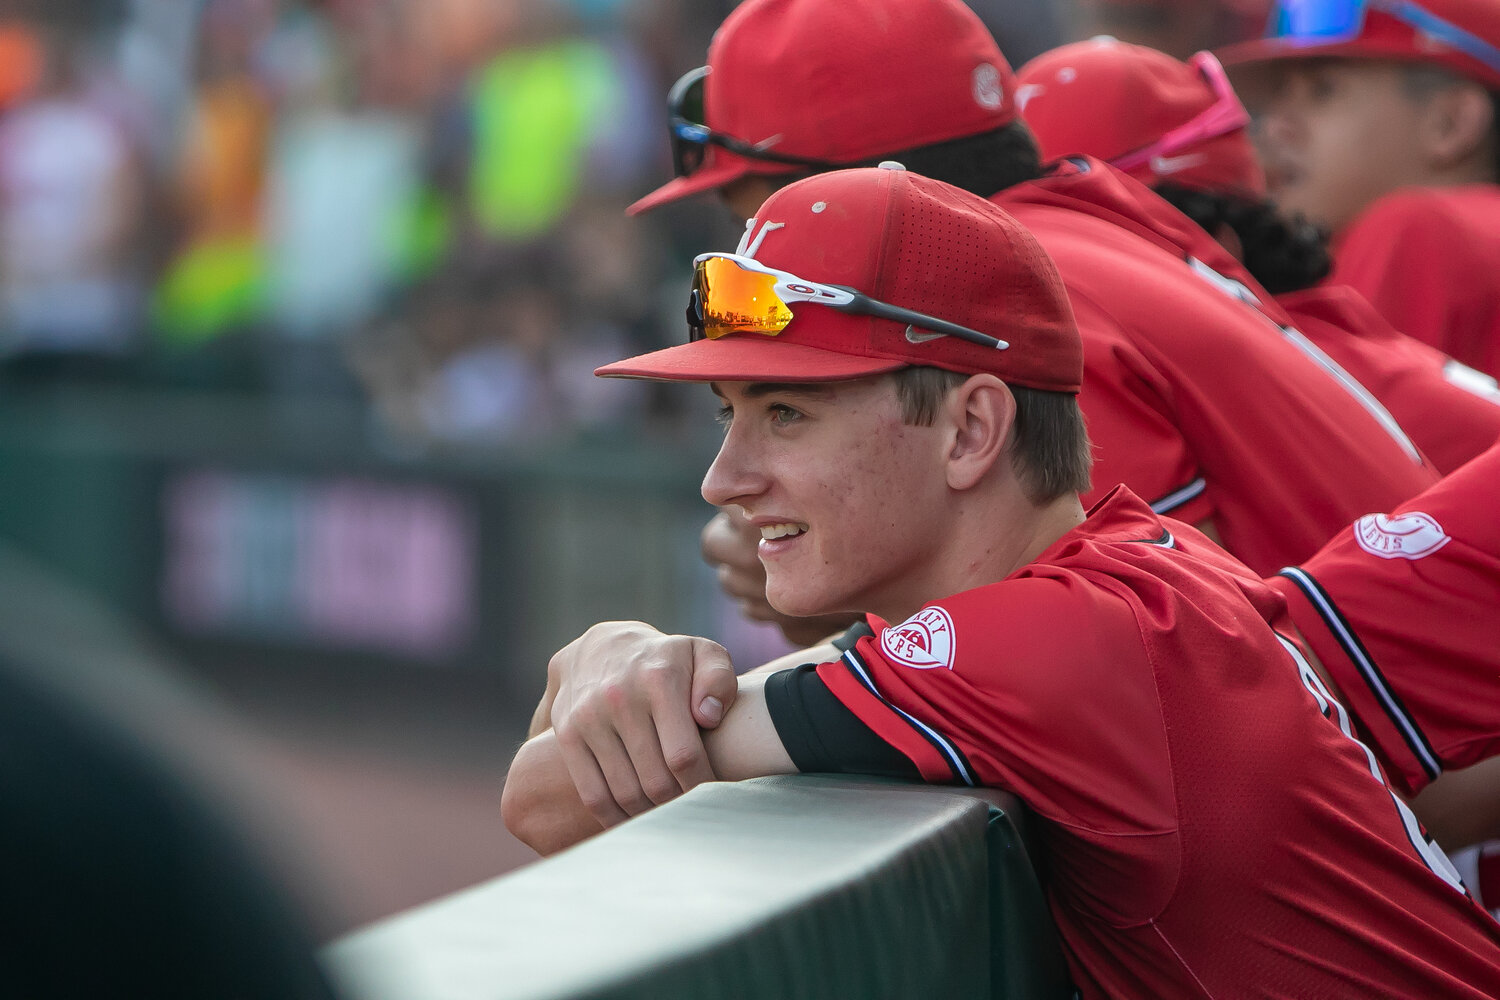 Katy players look on from the dugout during Friday's Regional Final between Katy and Pearland at Constellation Field in Sugar Land.